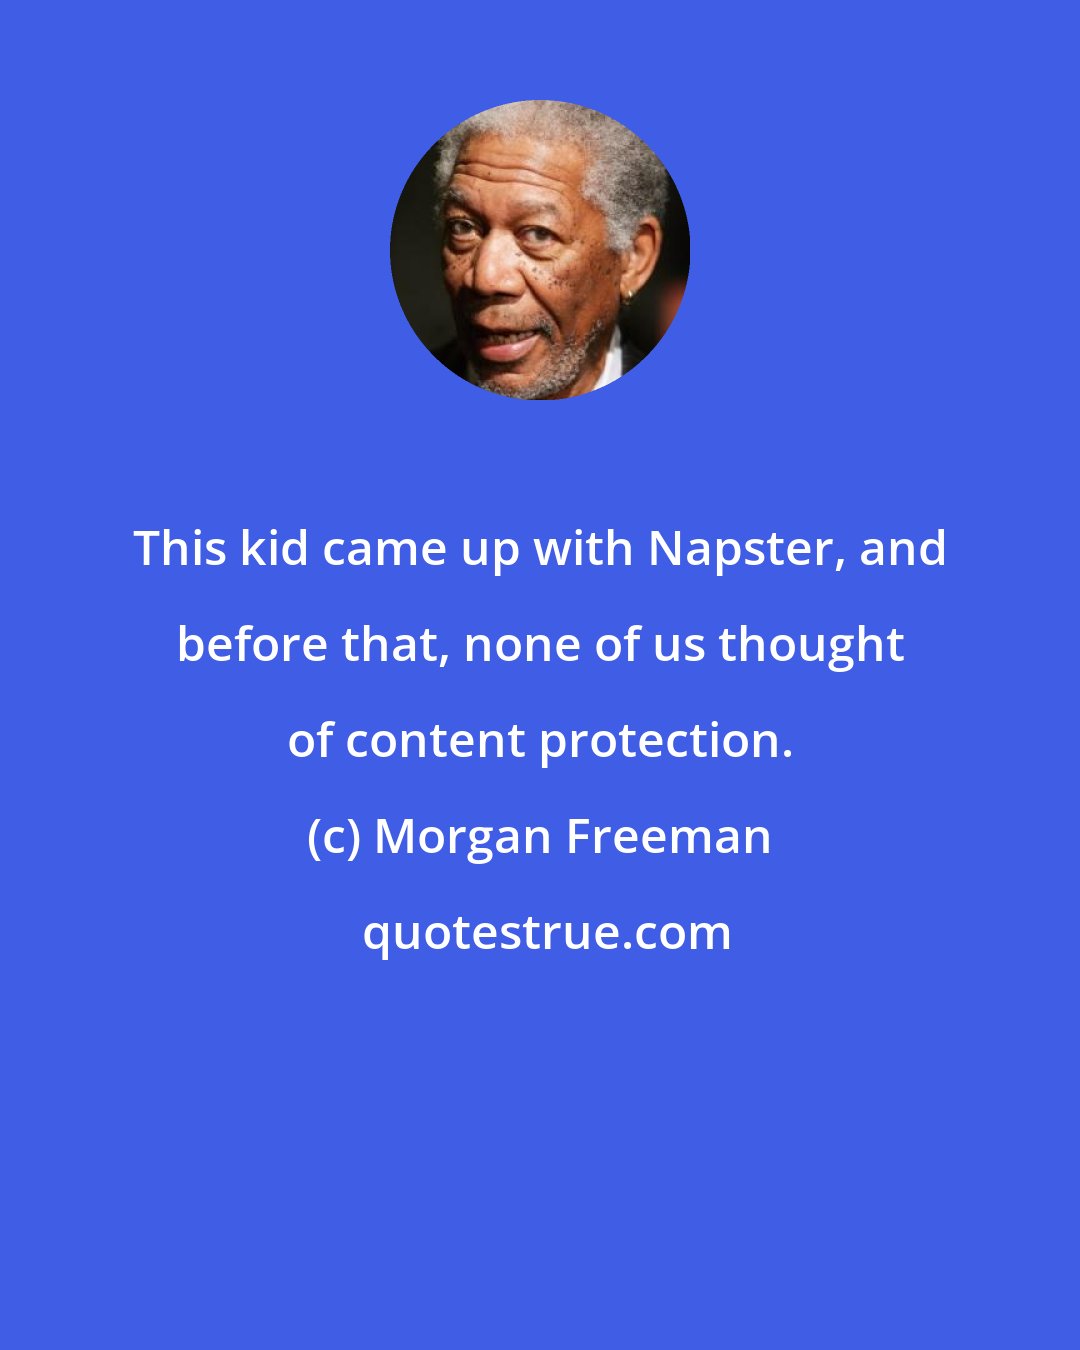 Morgan Freeman: This kid came up with Napster, and before that, none of us thought of content protection.